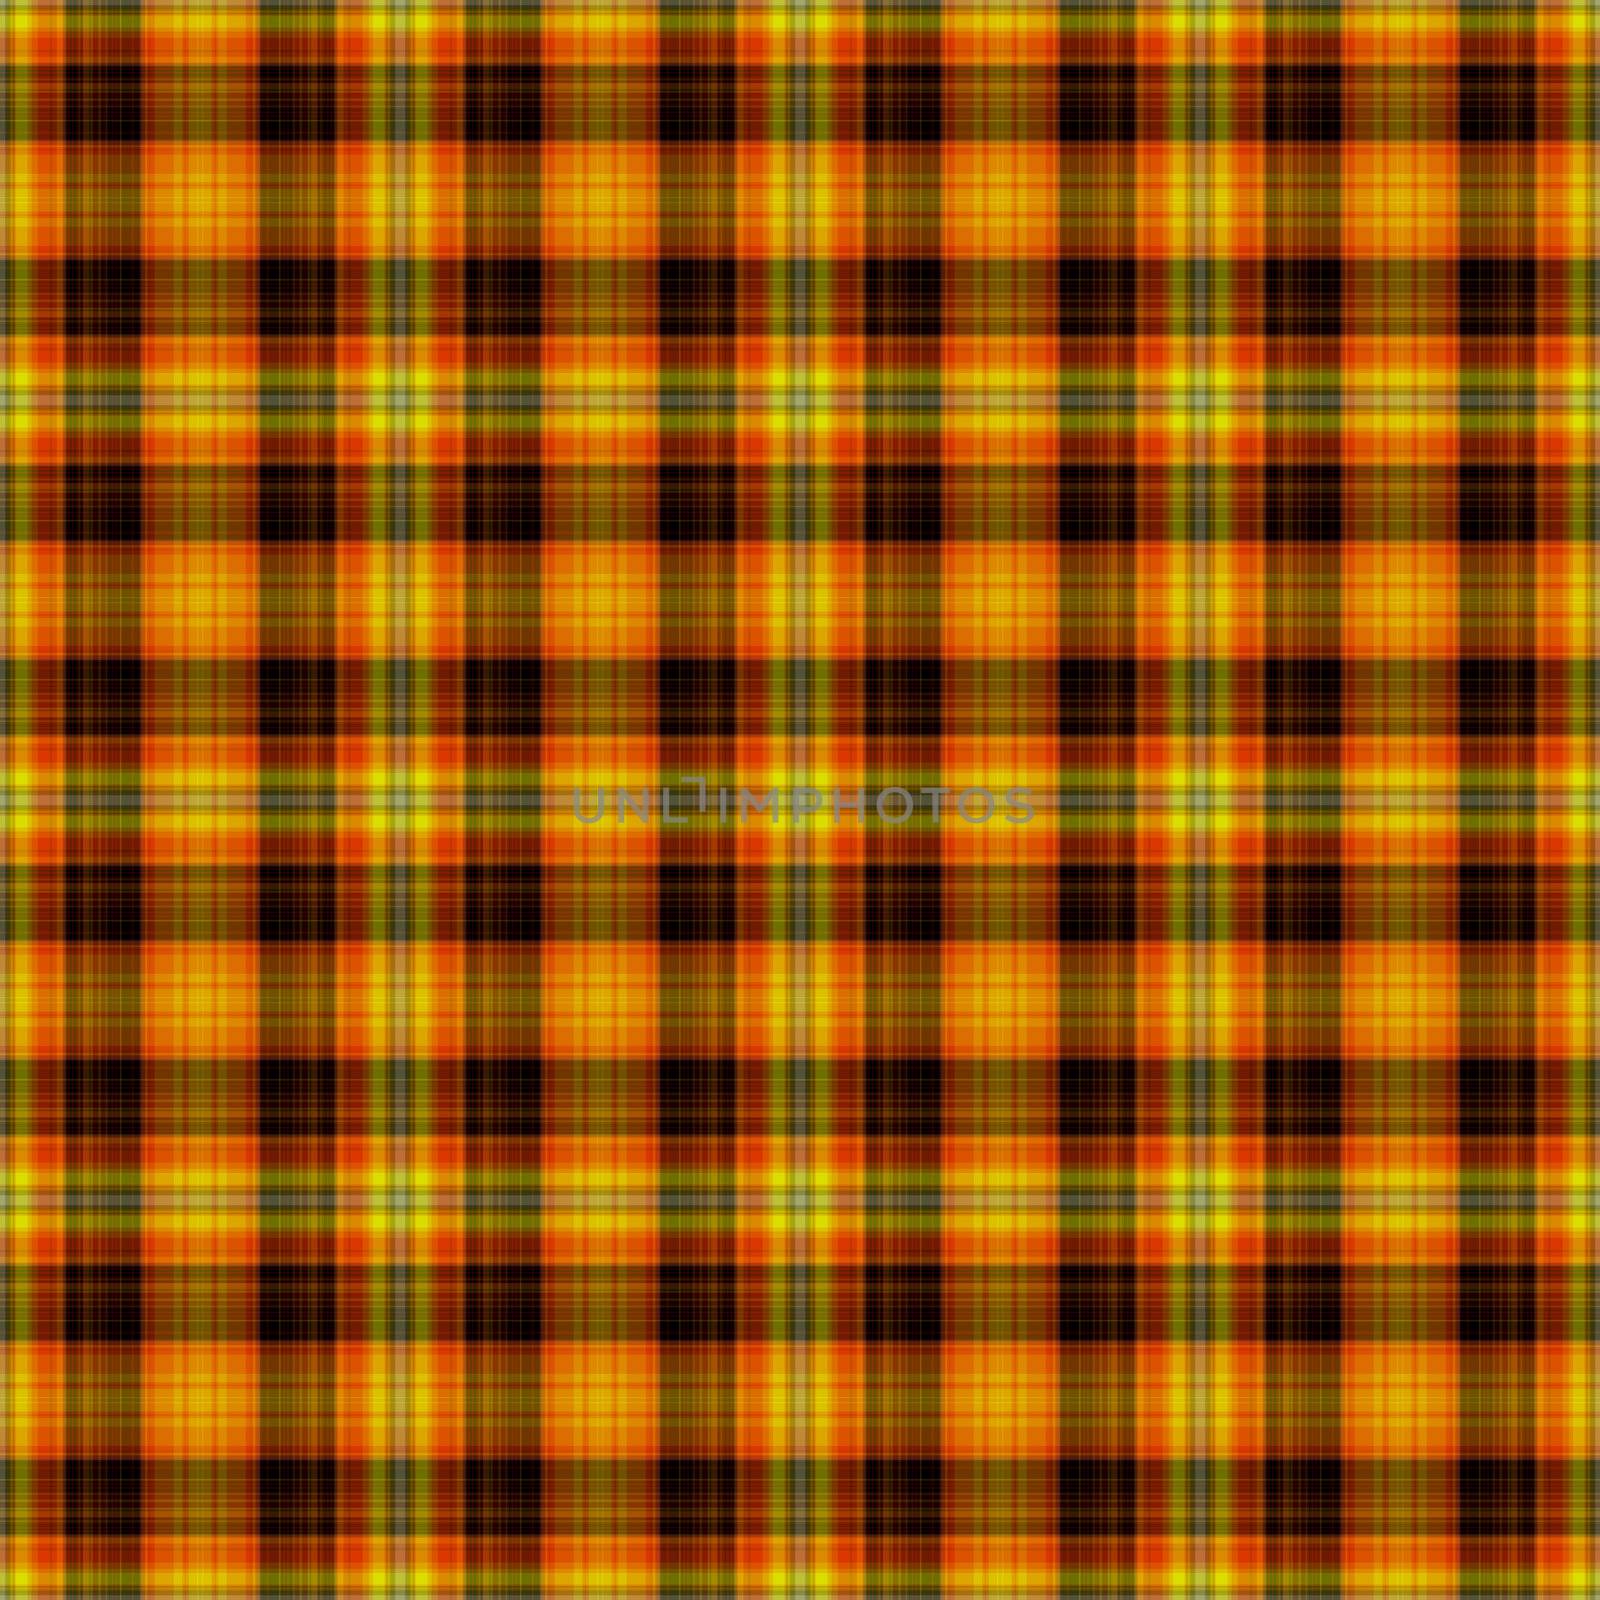 Seamless plaid pattern in bright orange, red, yellow, and black